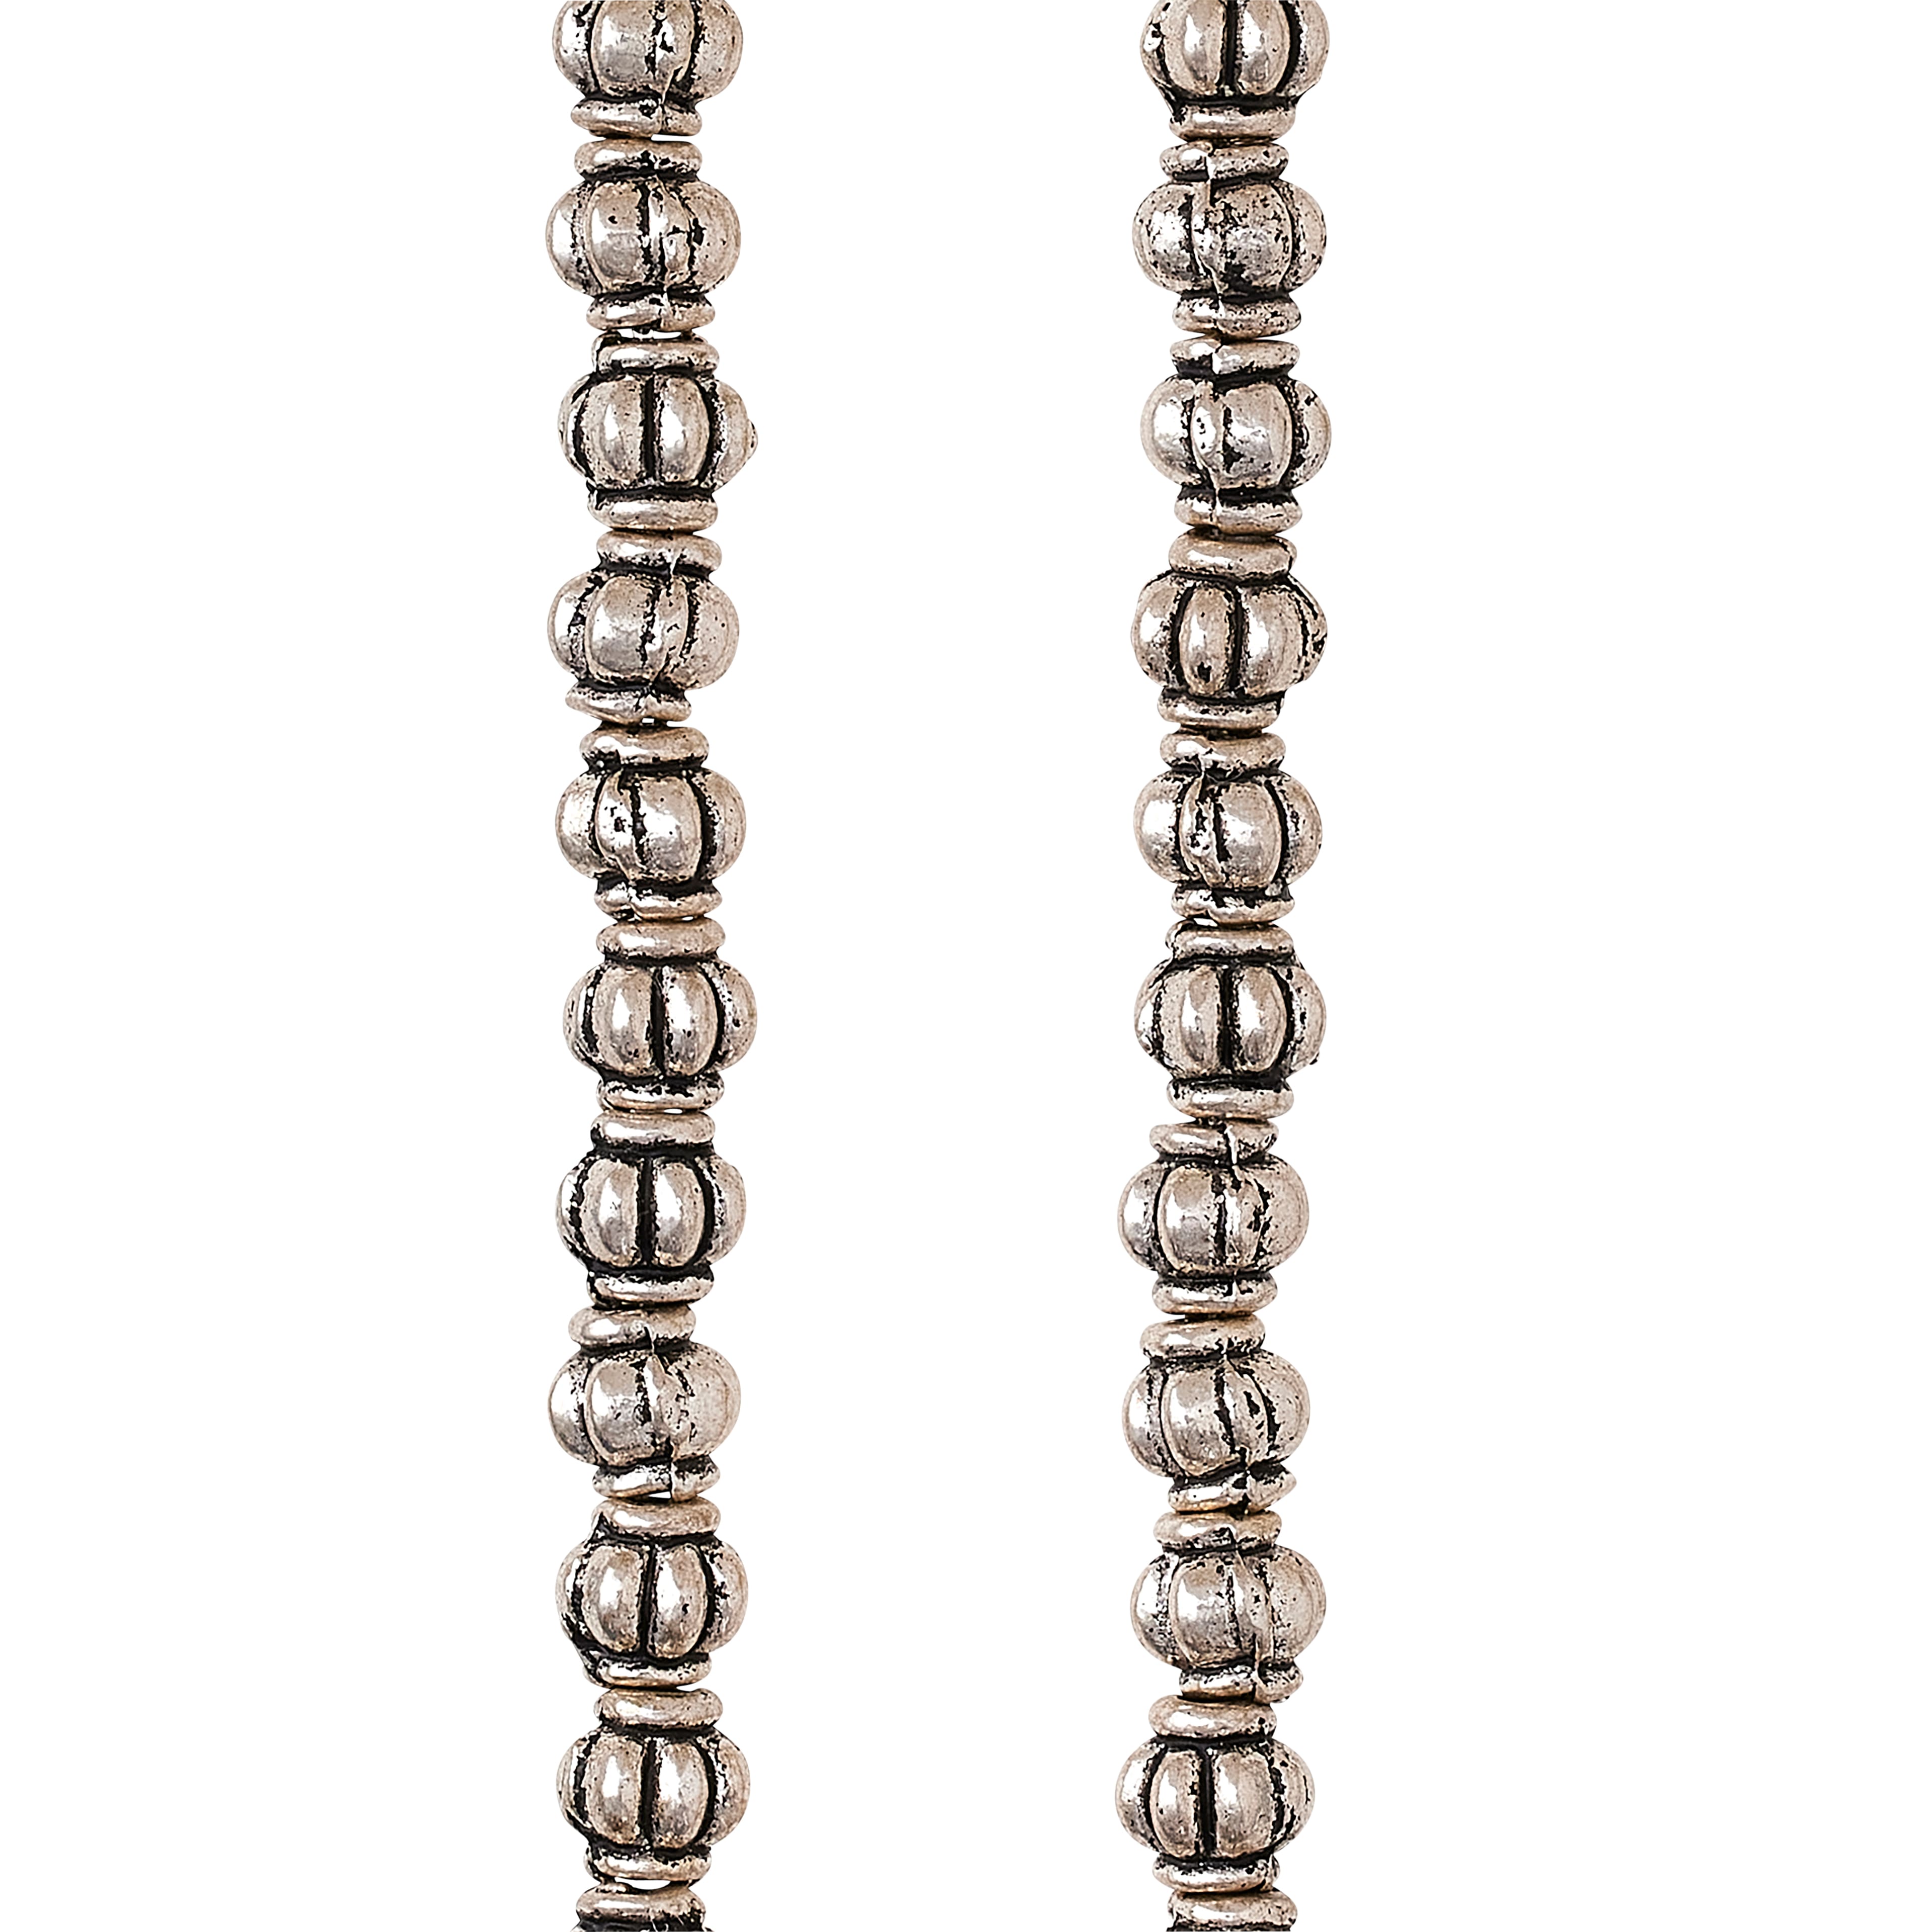 Antique Silver Melon Metal Rondelle Beads, 4mm by Bead Landing&#x2122;